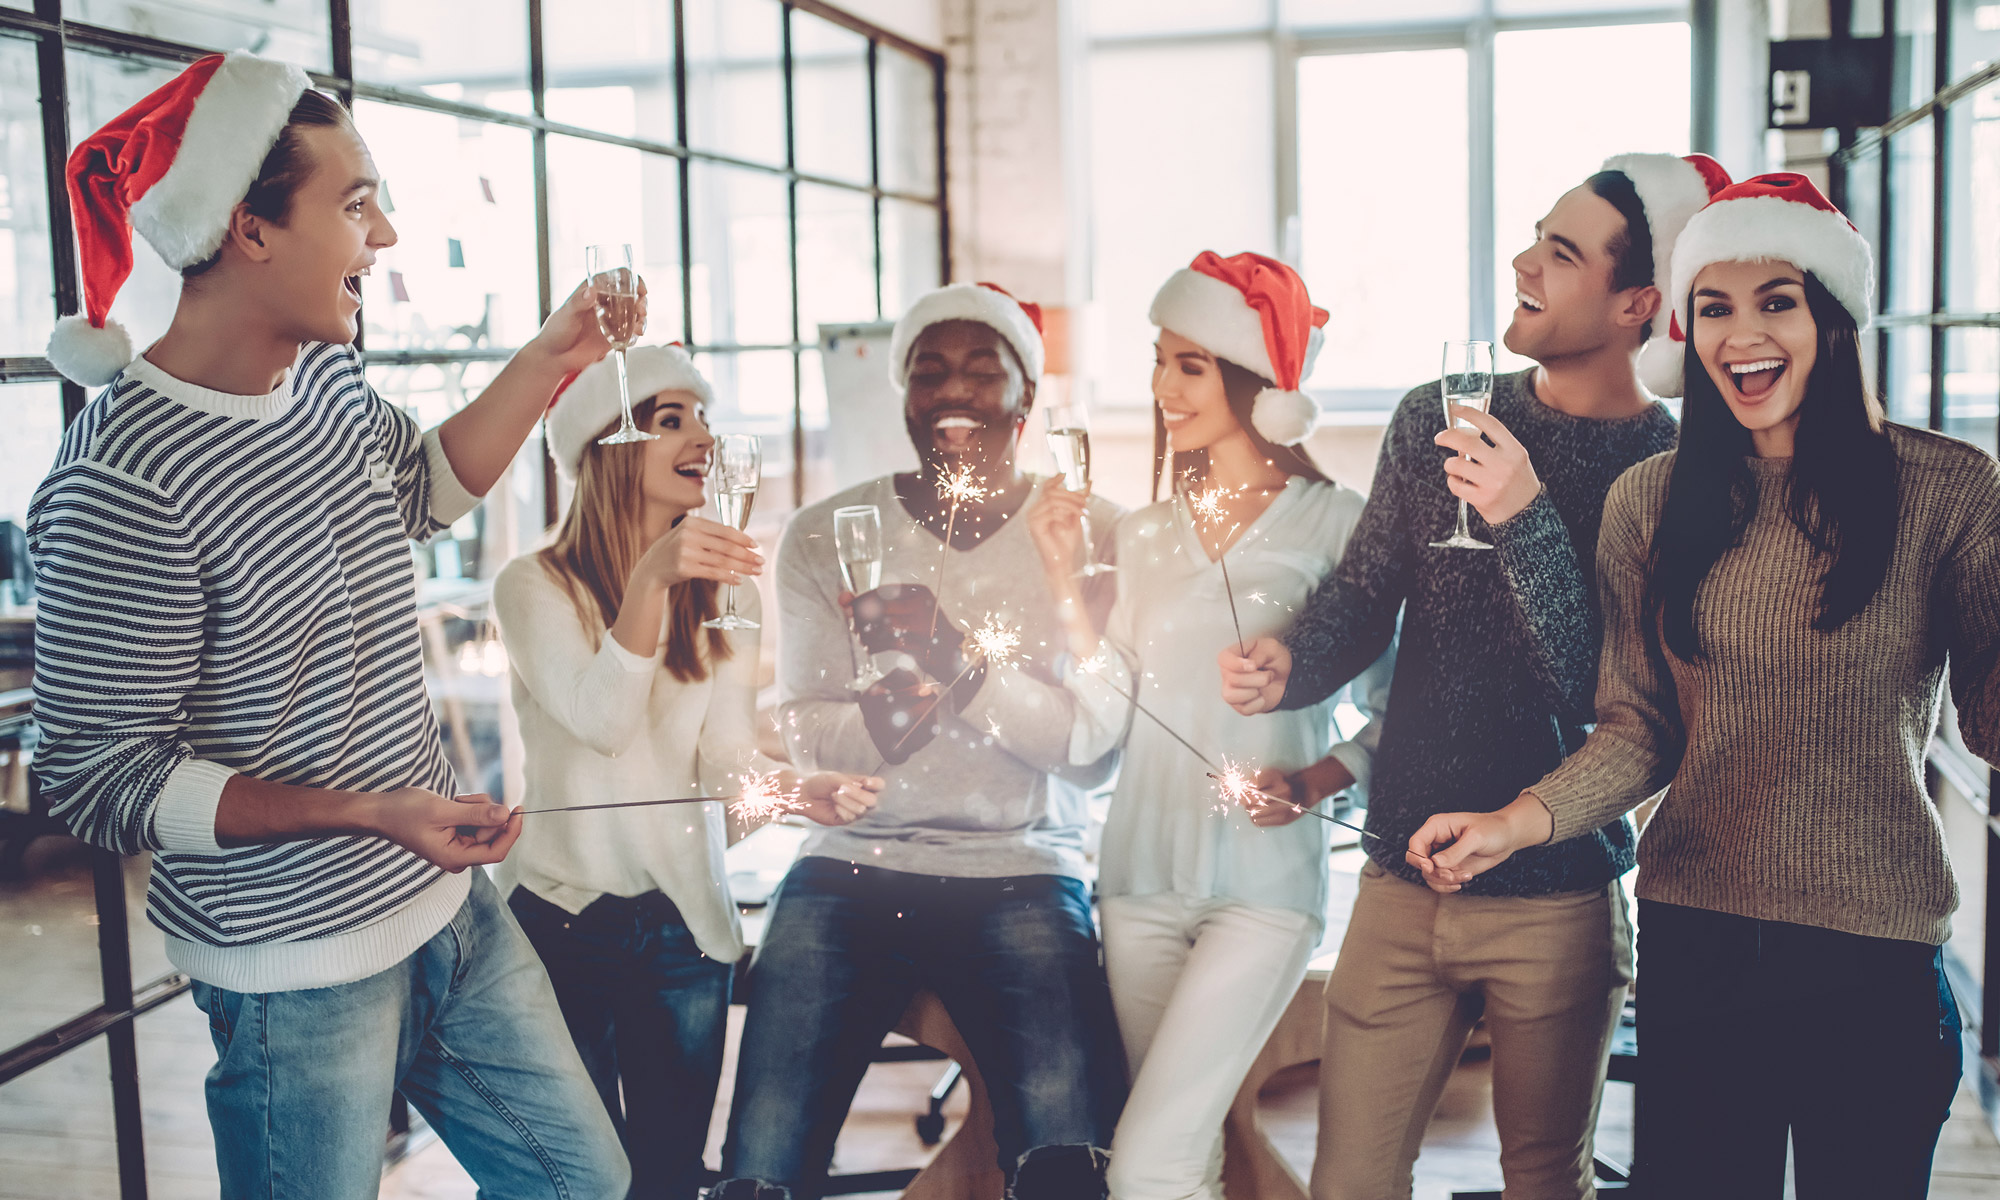 Office Holiday Party Ideas Your Coworkers Won’t Hate